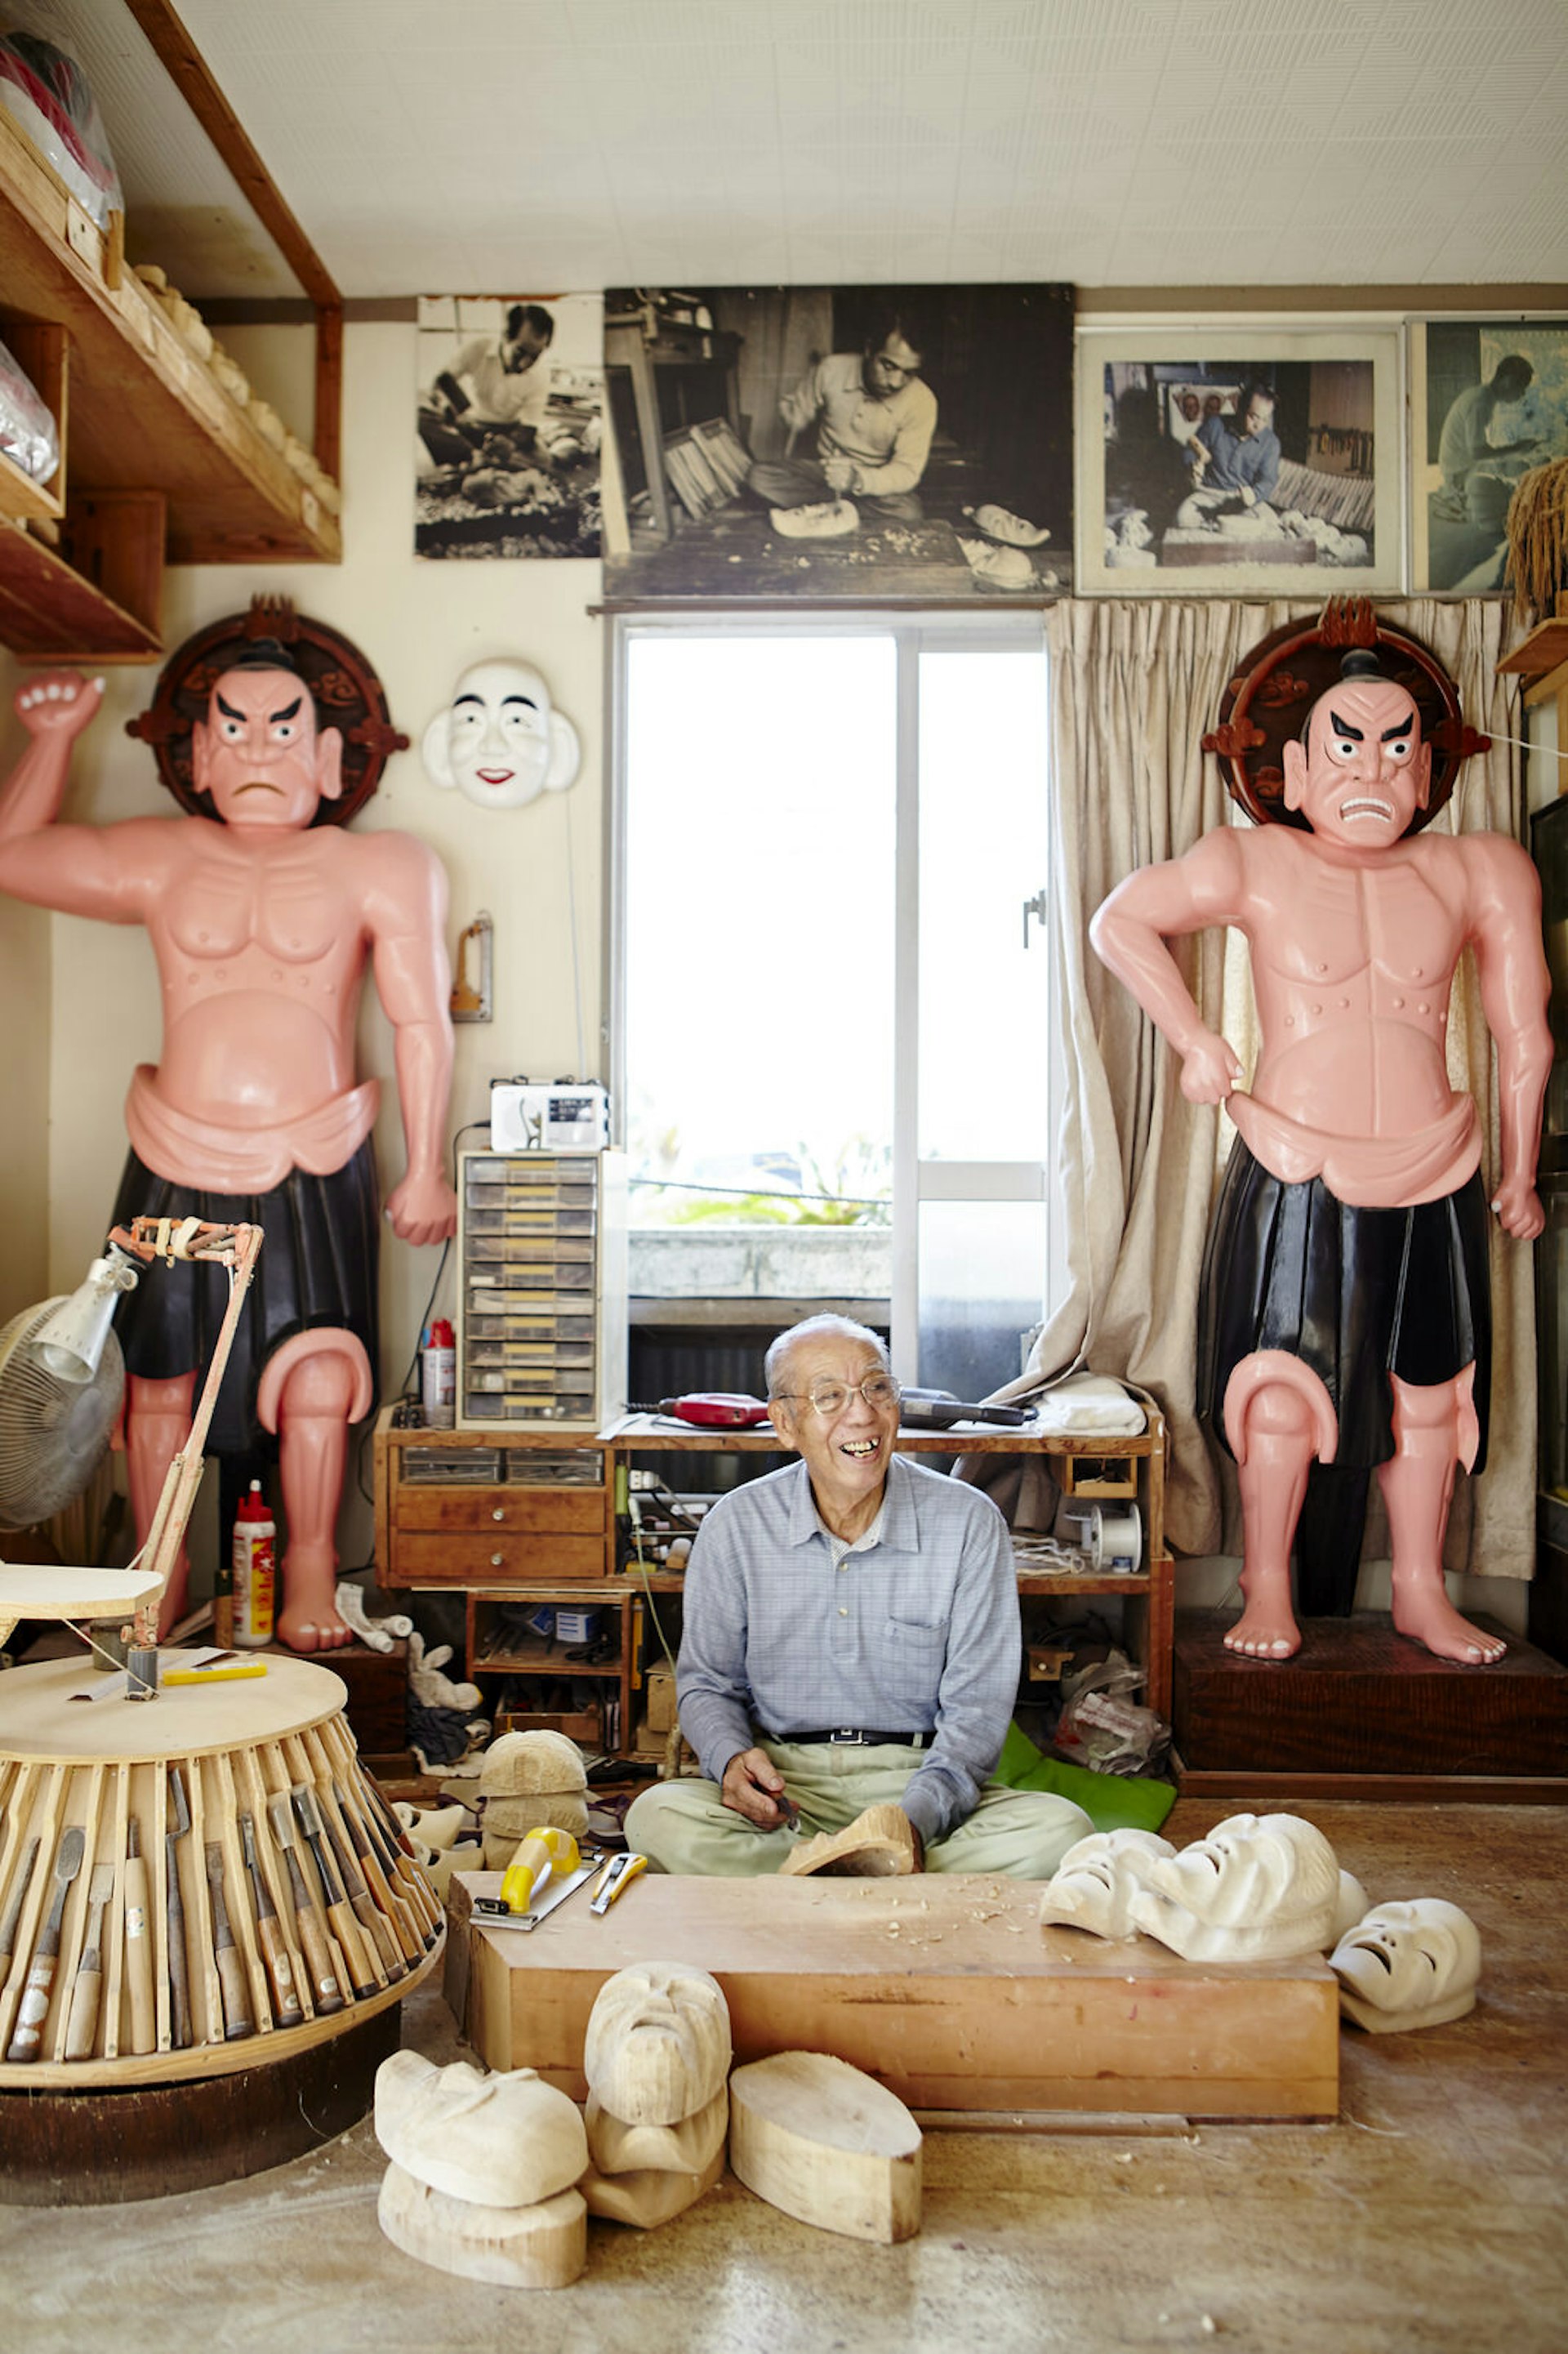 83-year-old Yusei Taba has been making masks since the age of 27; here in his workshop, he is surrounded by his craft and photos of him hard at work © Matt Munro / Lonely Planet